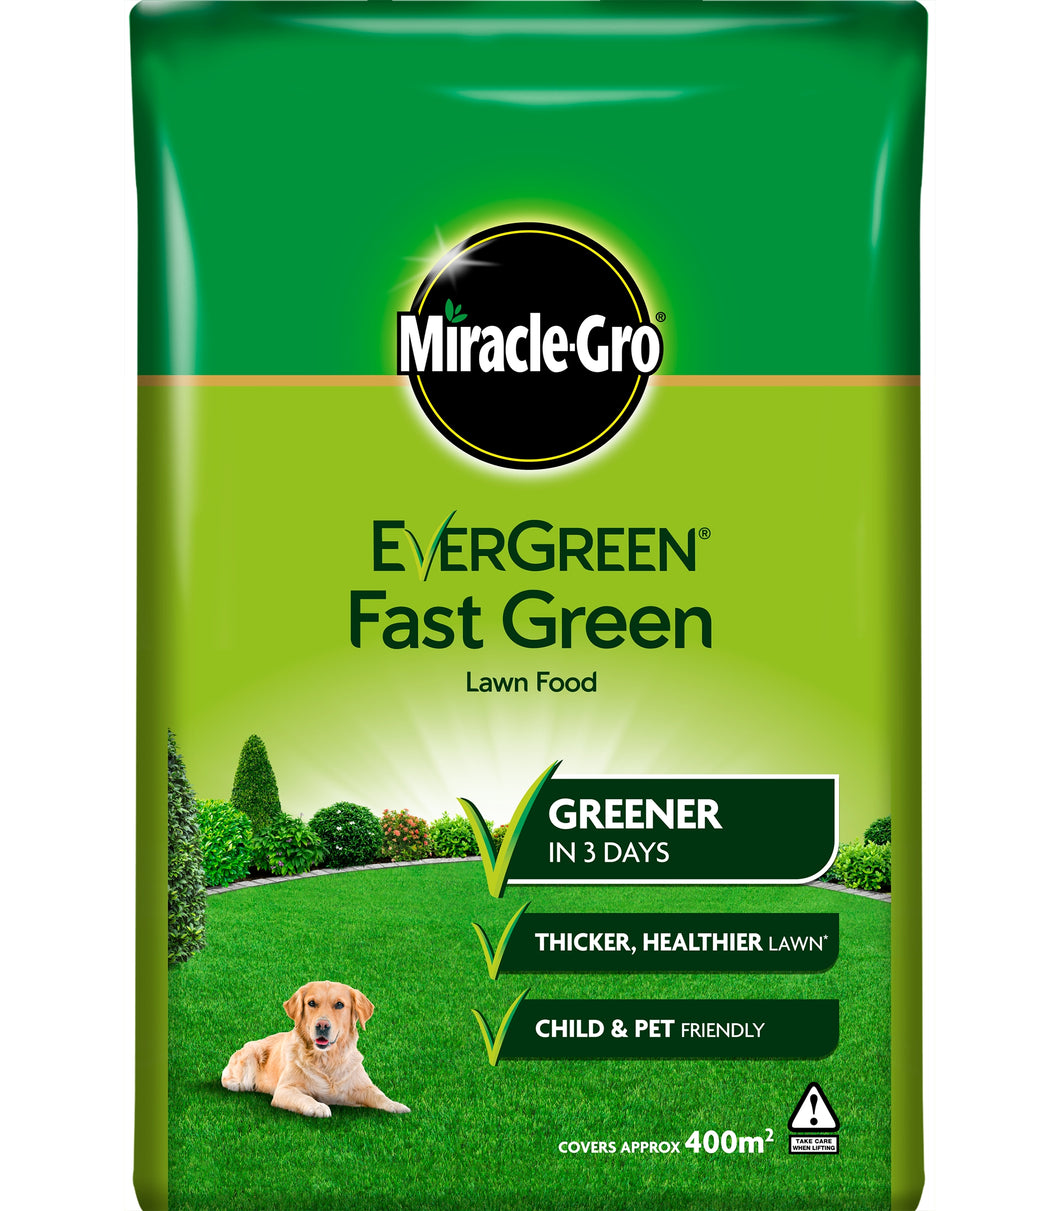 Miracle Gro Evergreen fast Green 400m2